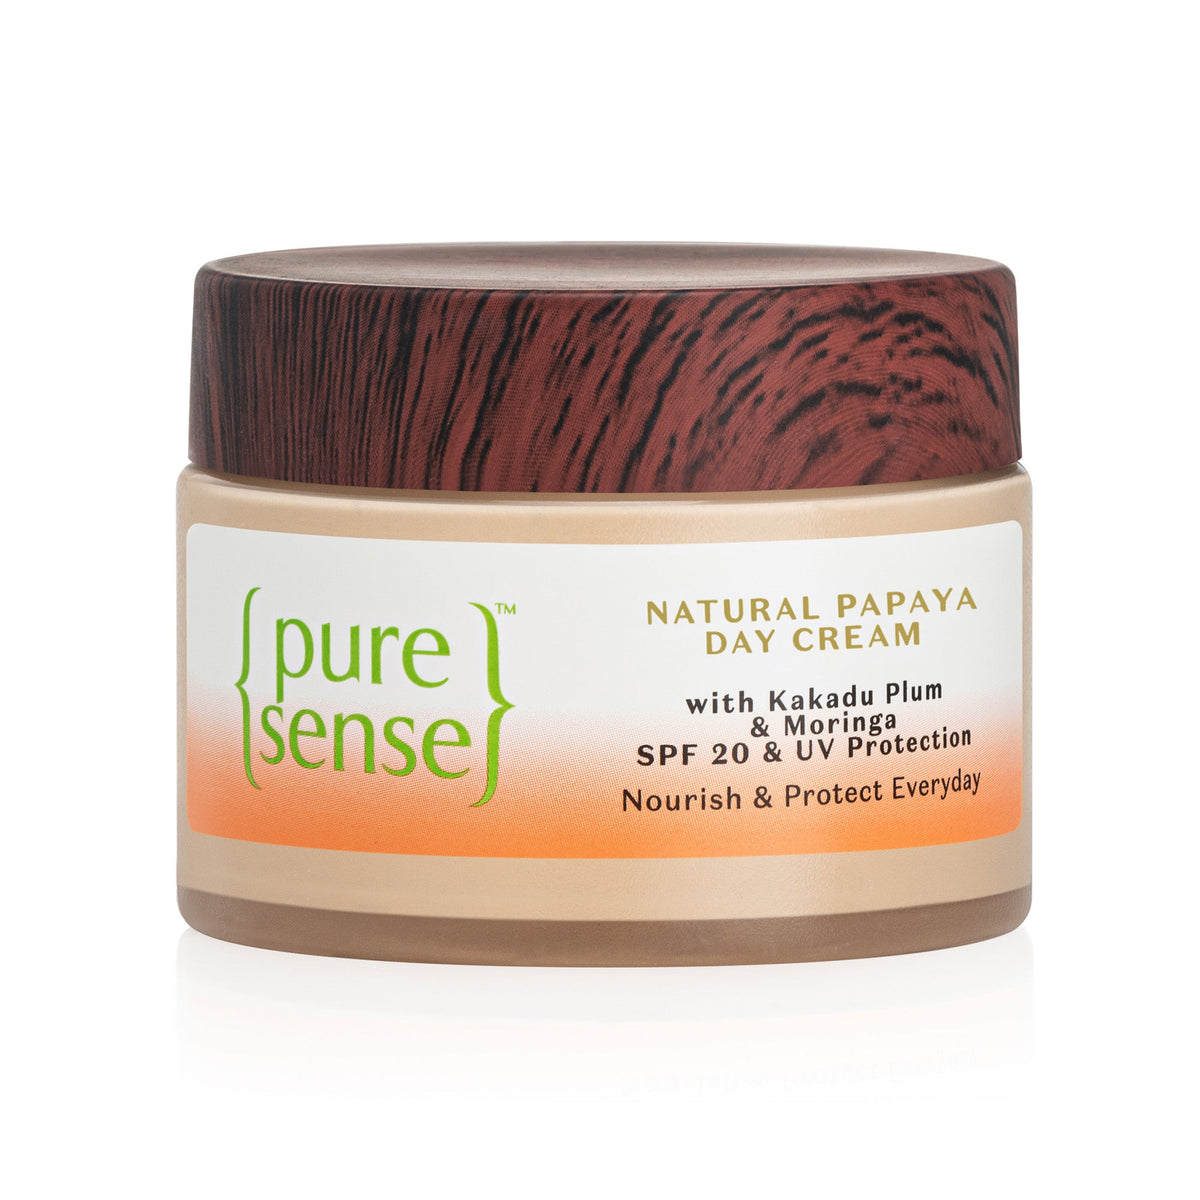 [CRED] Natural Papaya Day Cream | From the makers of Parachute Advansed | 60g